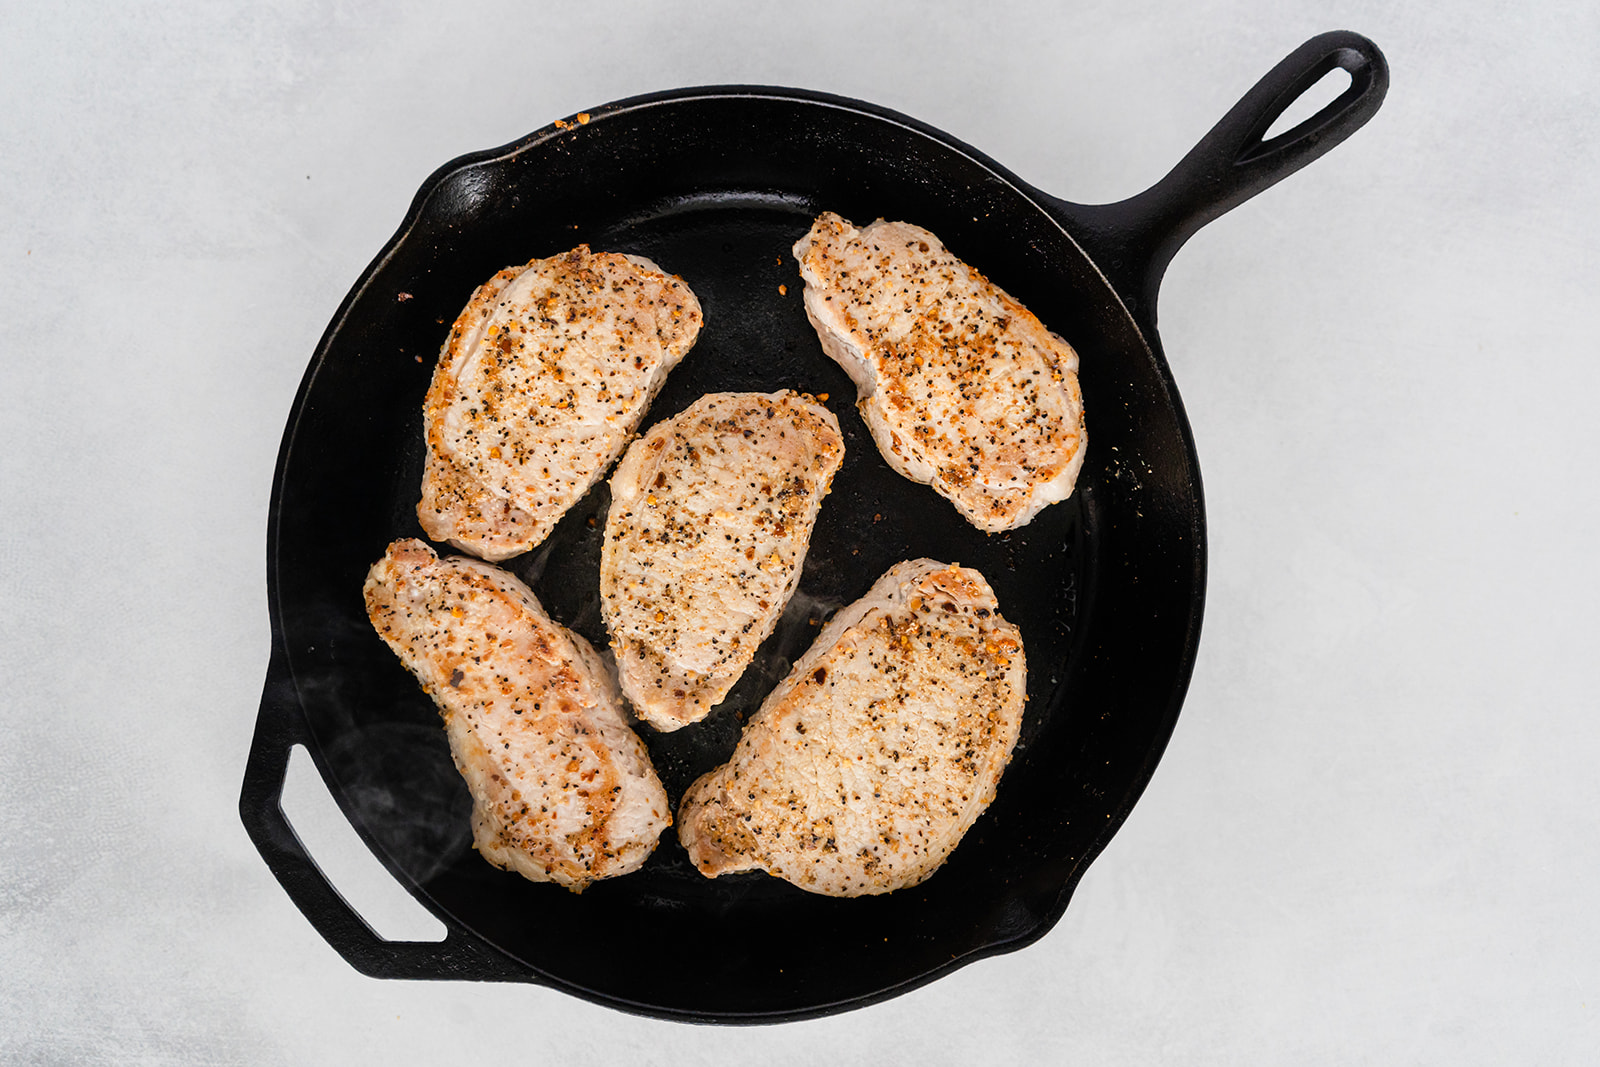 A cast iron pan with cooked, seasoned pork chops on it.